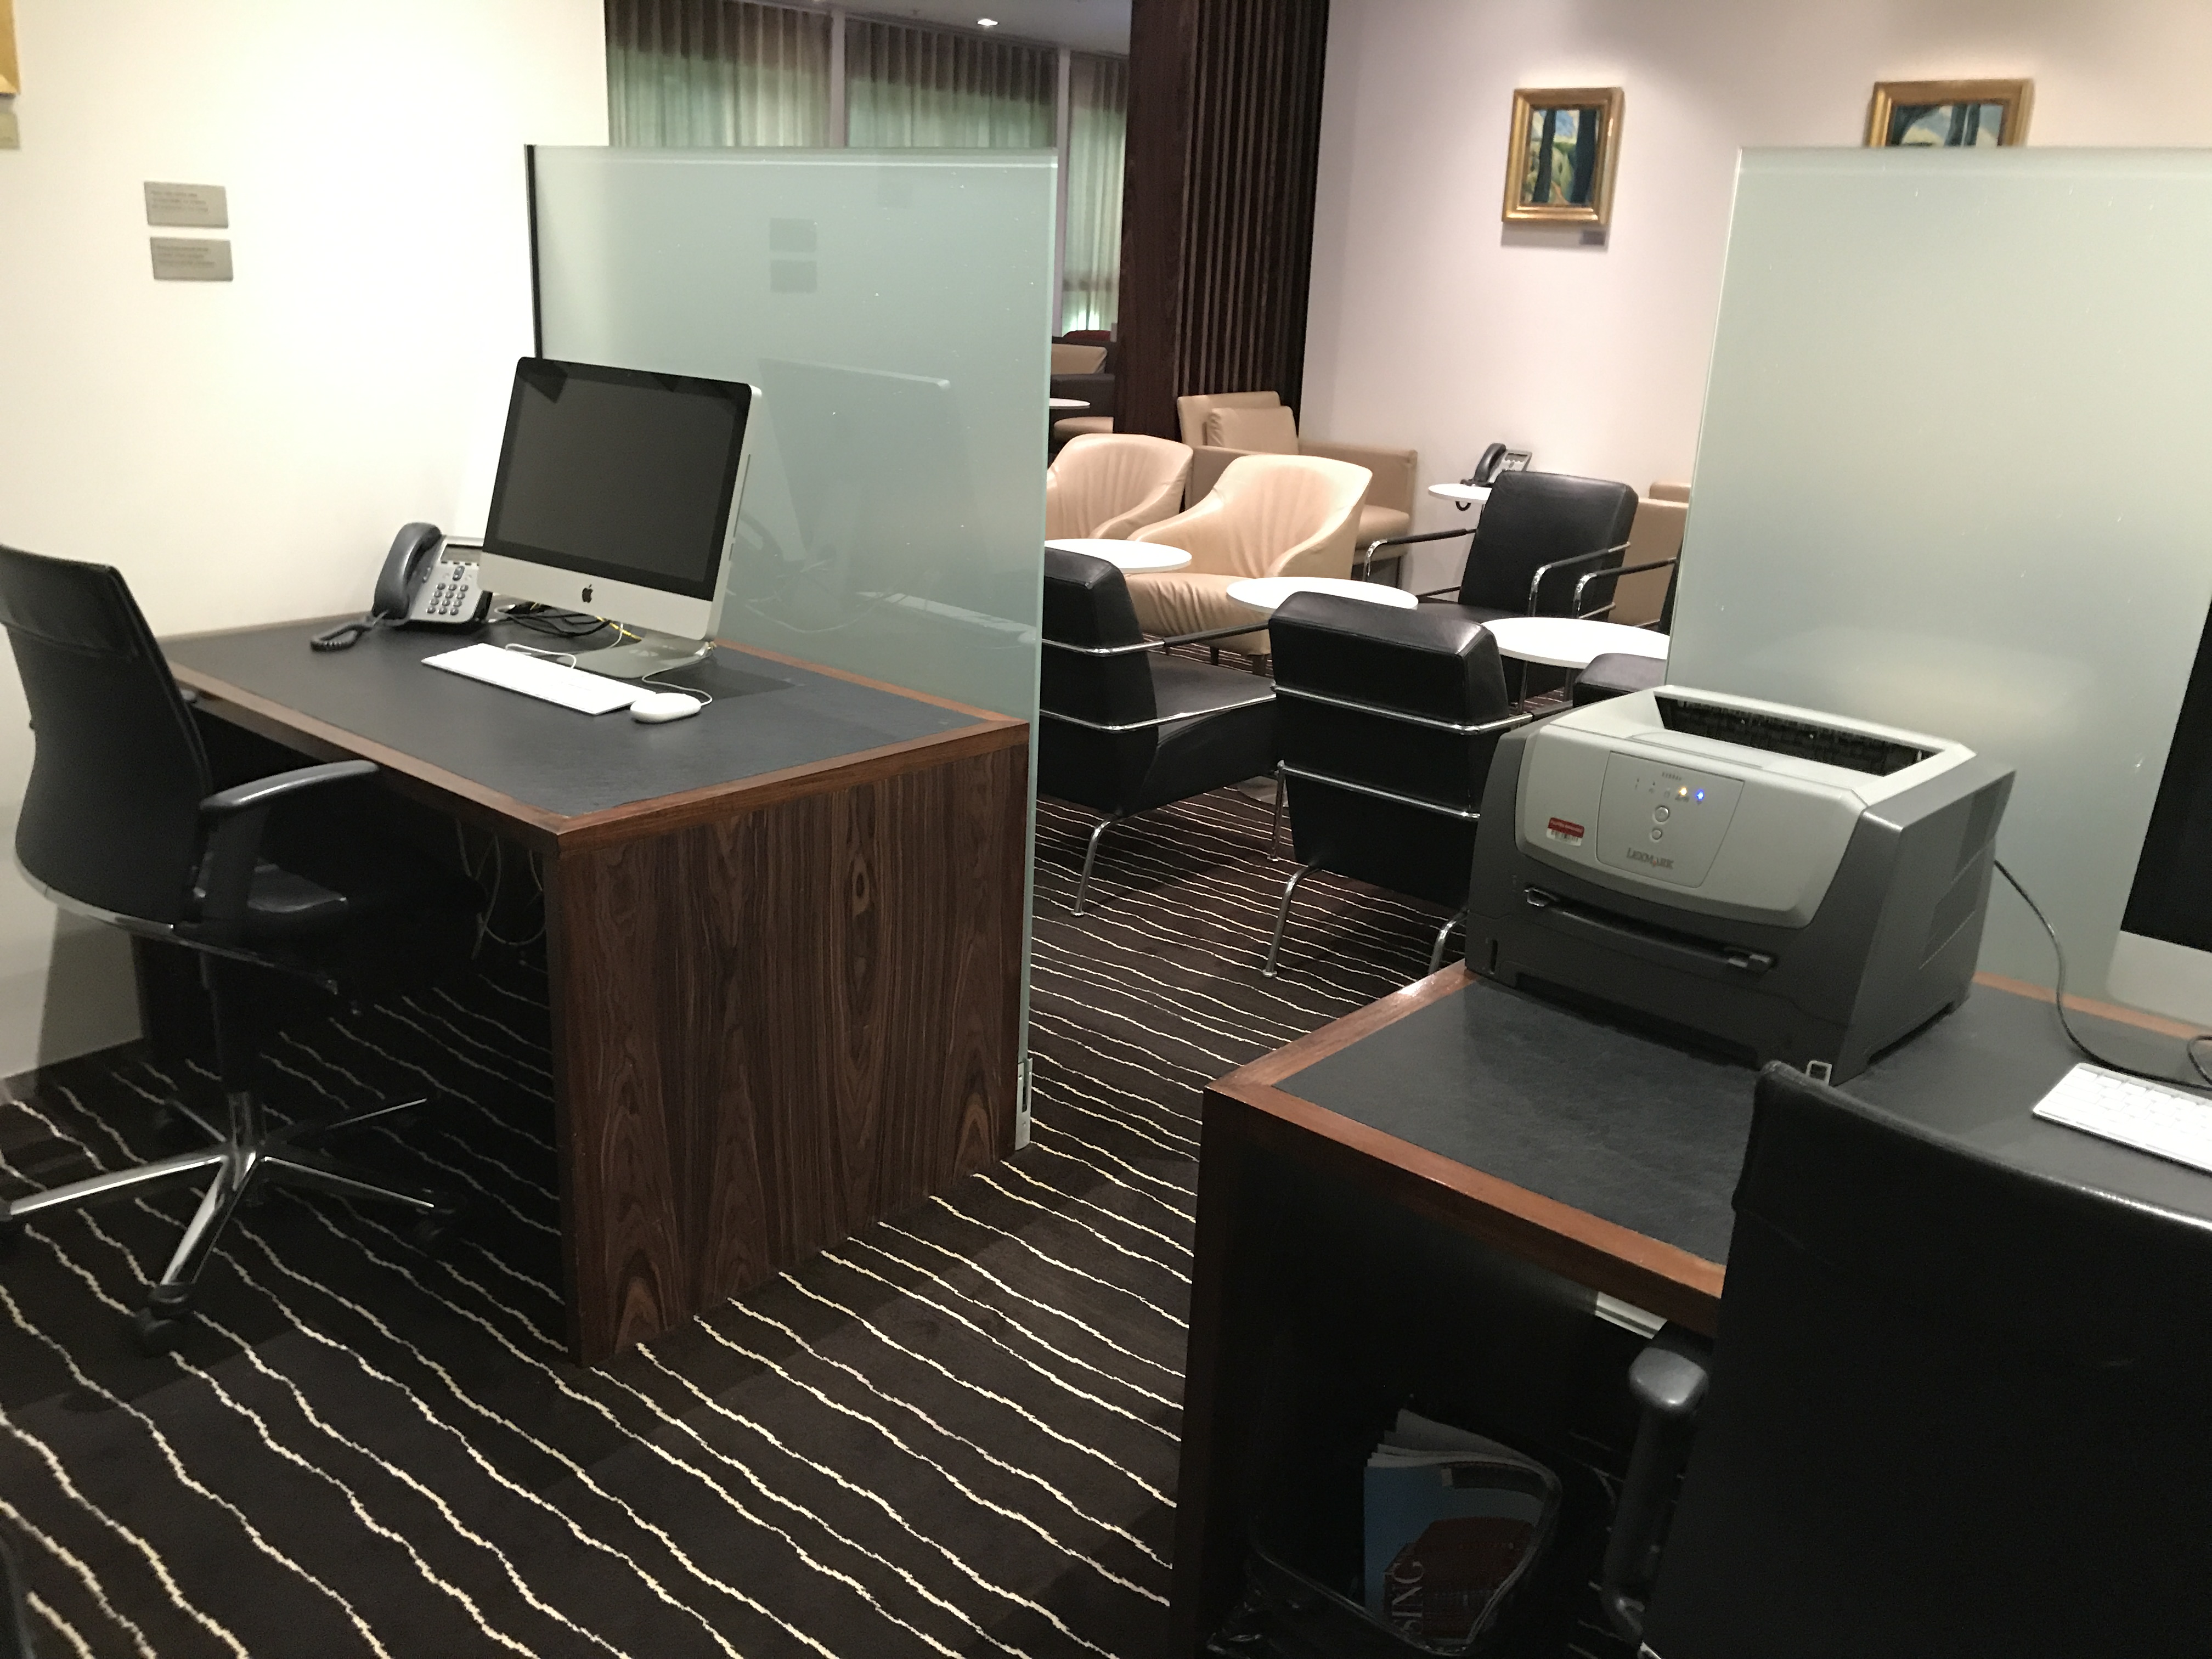 a room with desks and computers